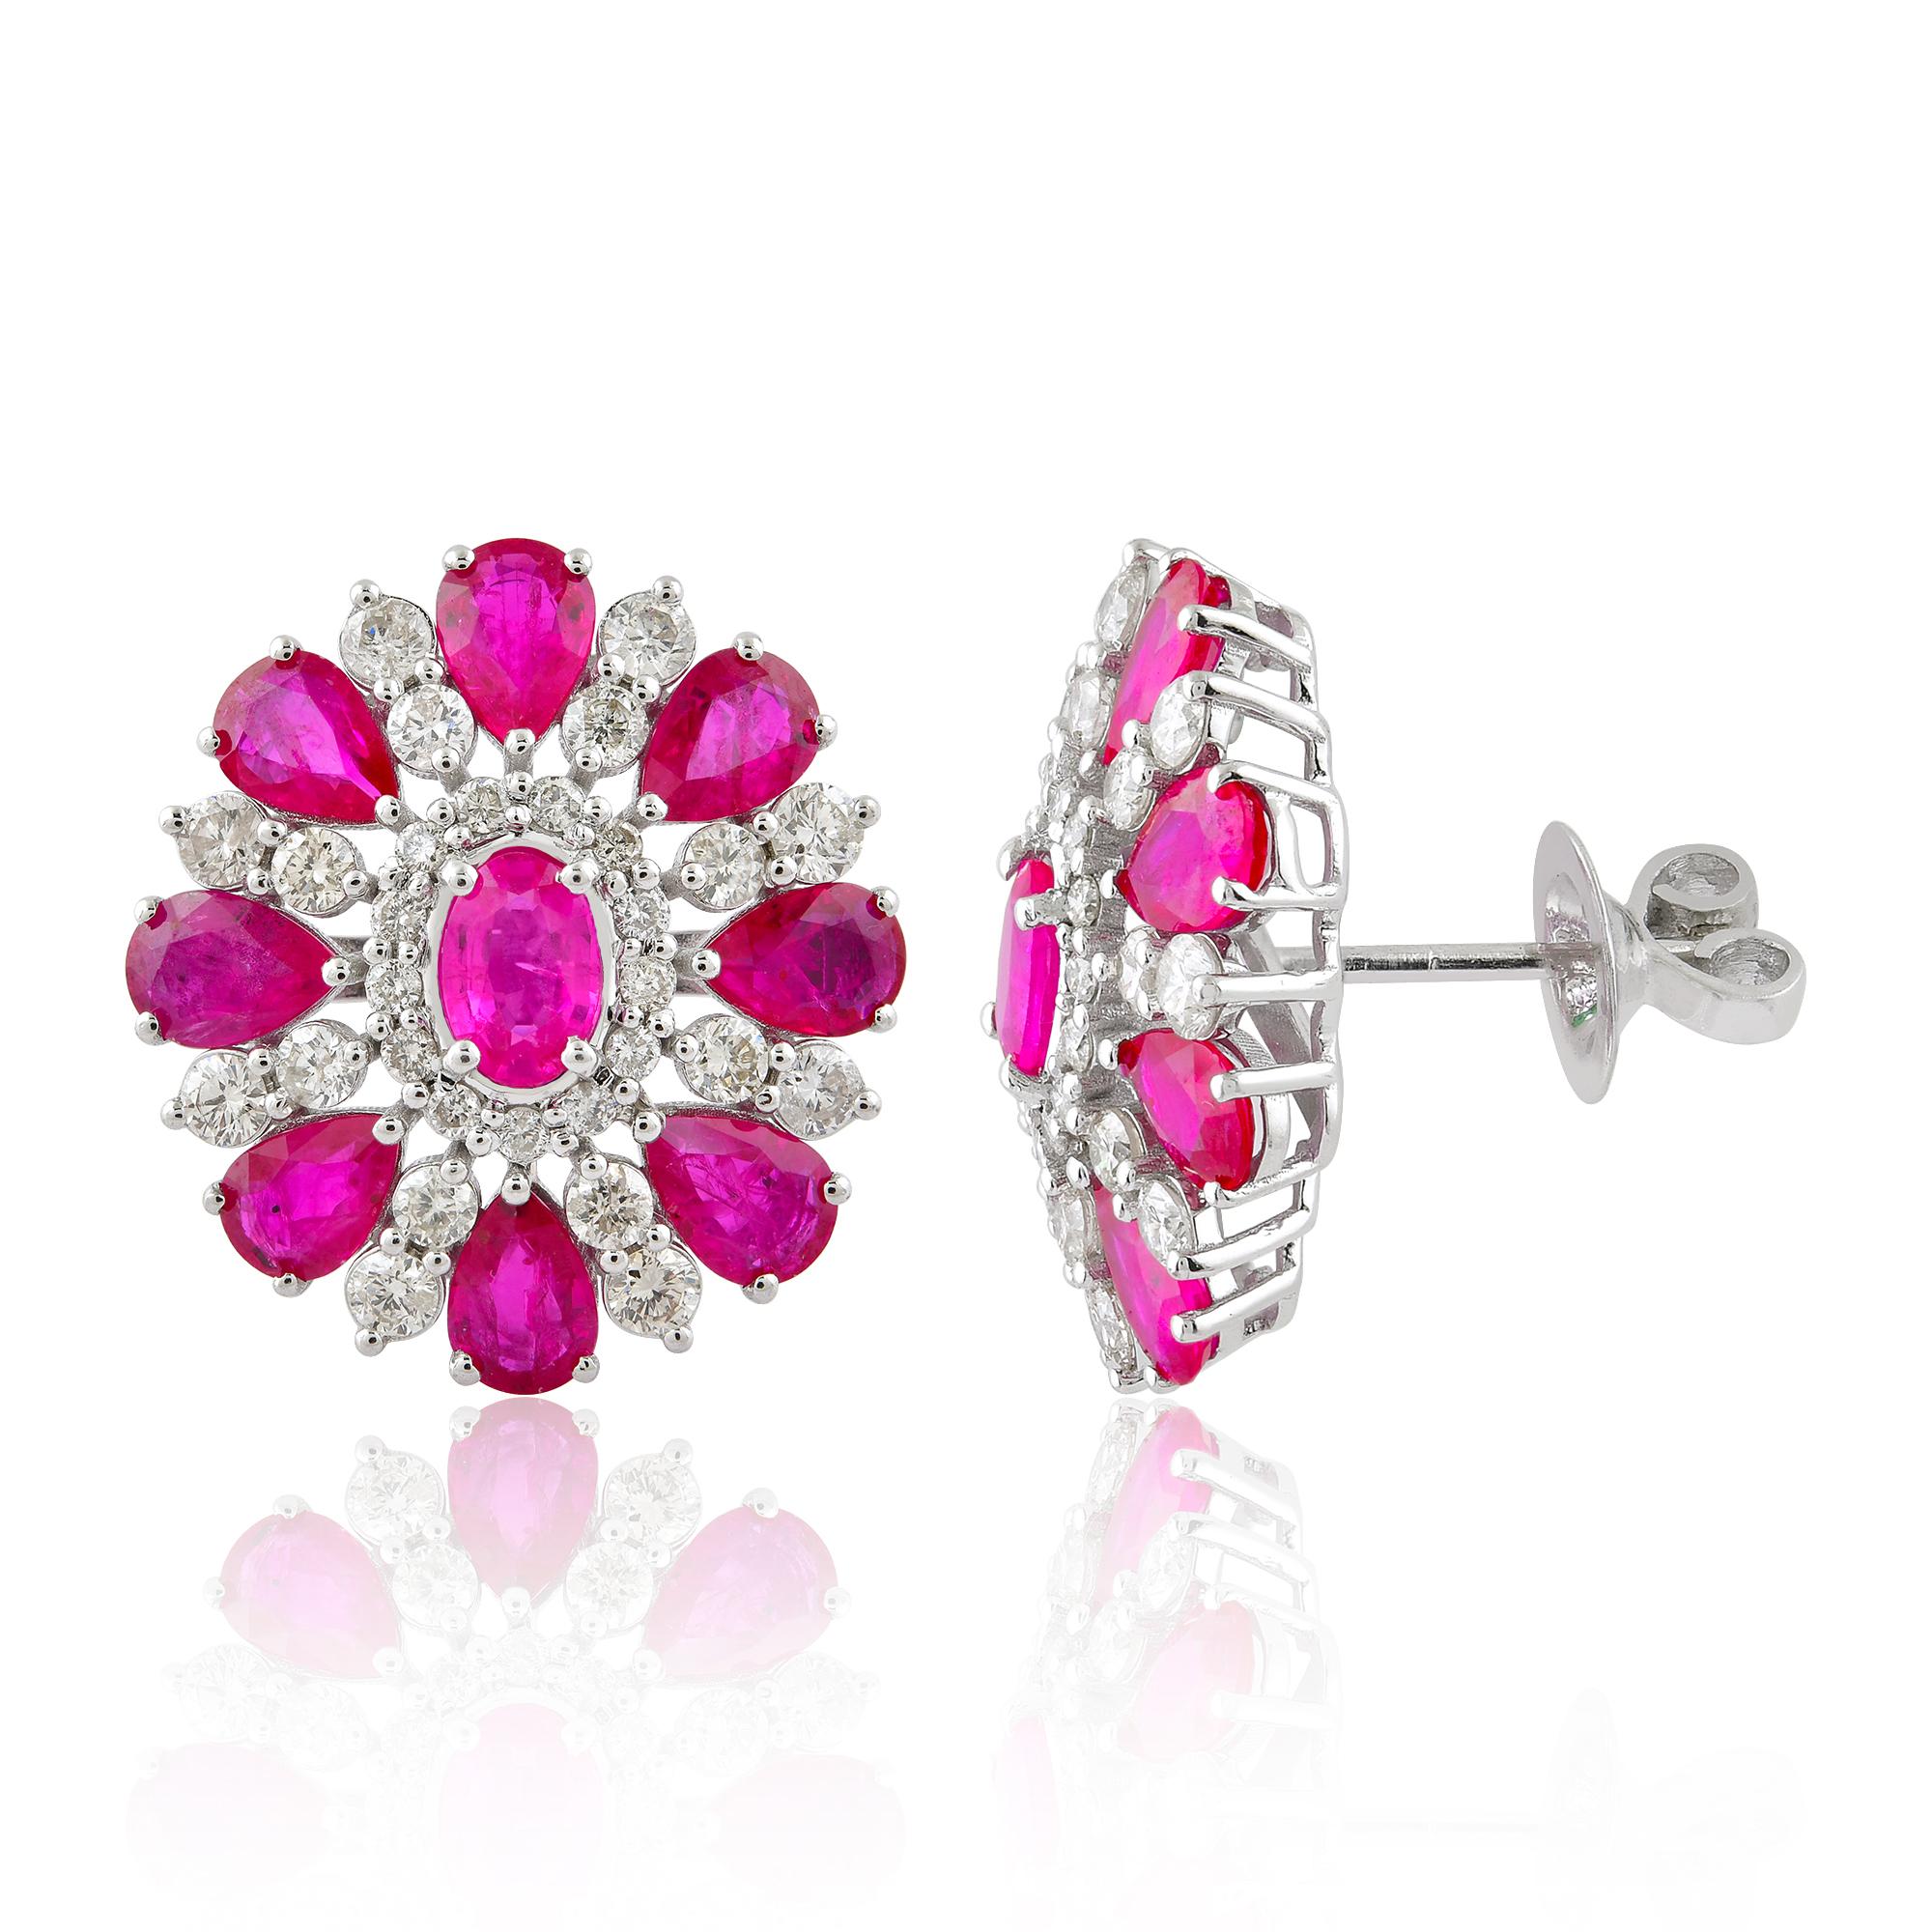 These Diamond Stud Earrings with 1.85 ct. Genuine Diamonds & 7.38 ct. Natural Ruby are a promise of perfection and purity. These studs are set in 10k Solid White Gold.

These are a perfect Gift for Mom, Fiancée, Daughter, Girlfriend, Wife and